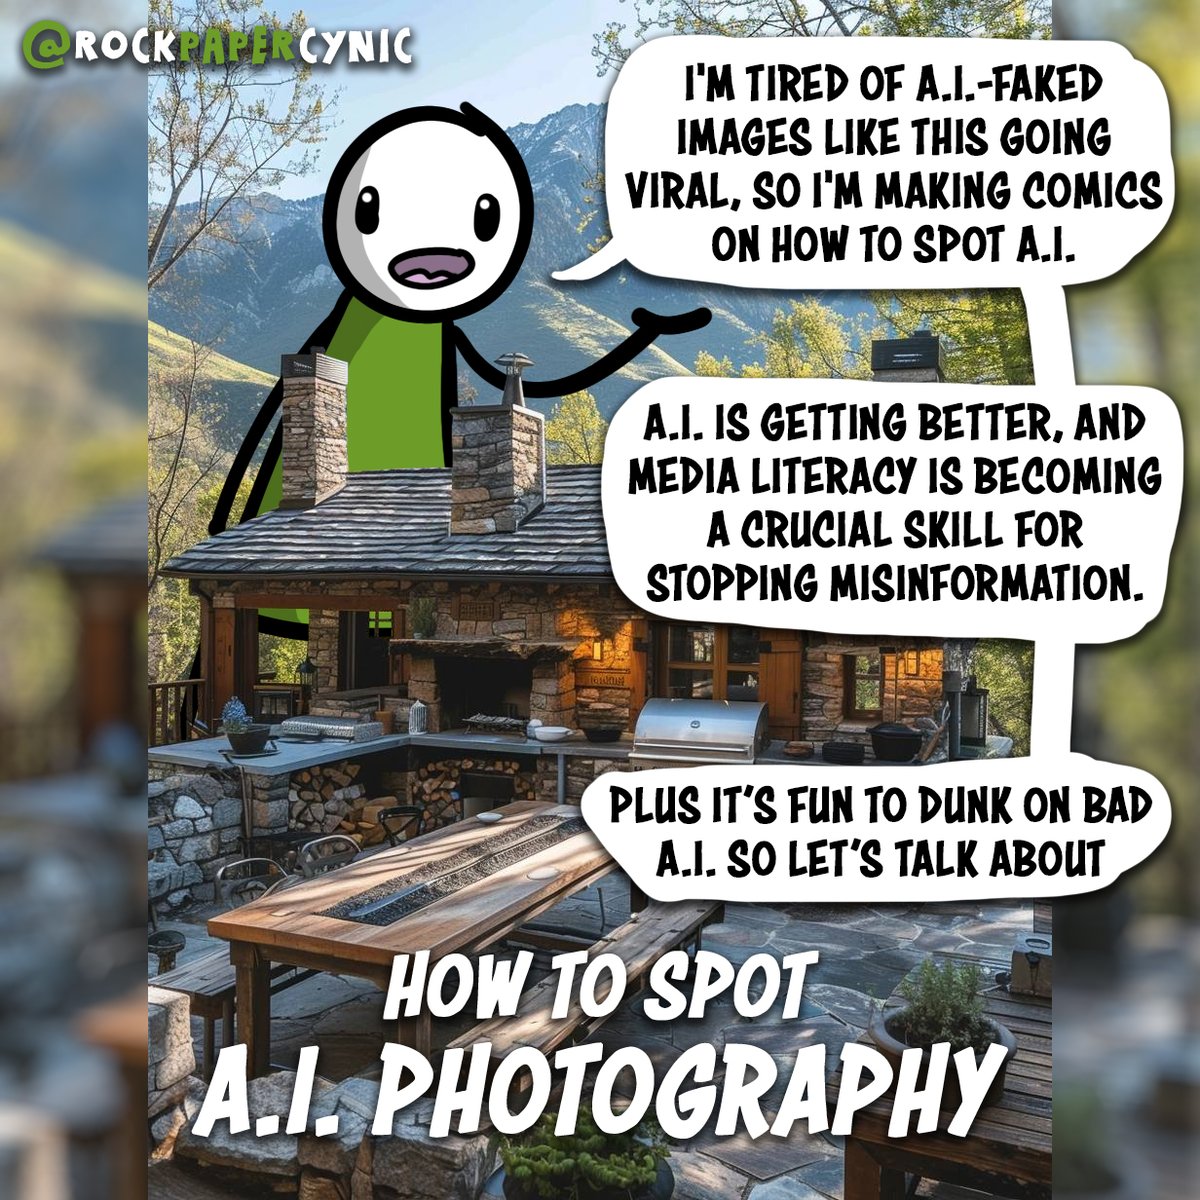 Have you noticed hundreds of Facebook pages spewing AI-generated photos every day? AI's getting better at tricking people—to the point that AI images are being used for scams and fake news stories Let's learn how to spot AI photos by taking tour of this AI-designed house! 🧵